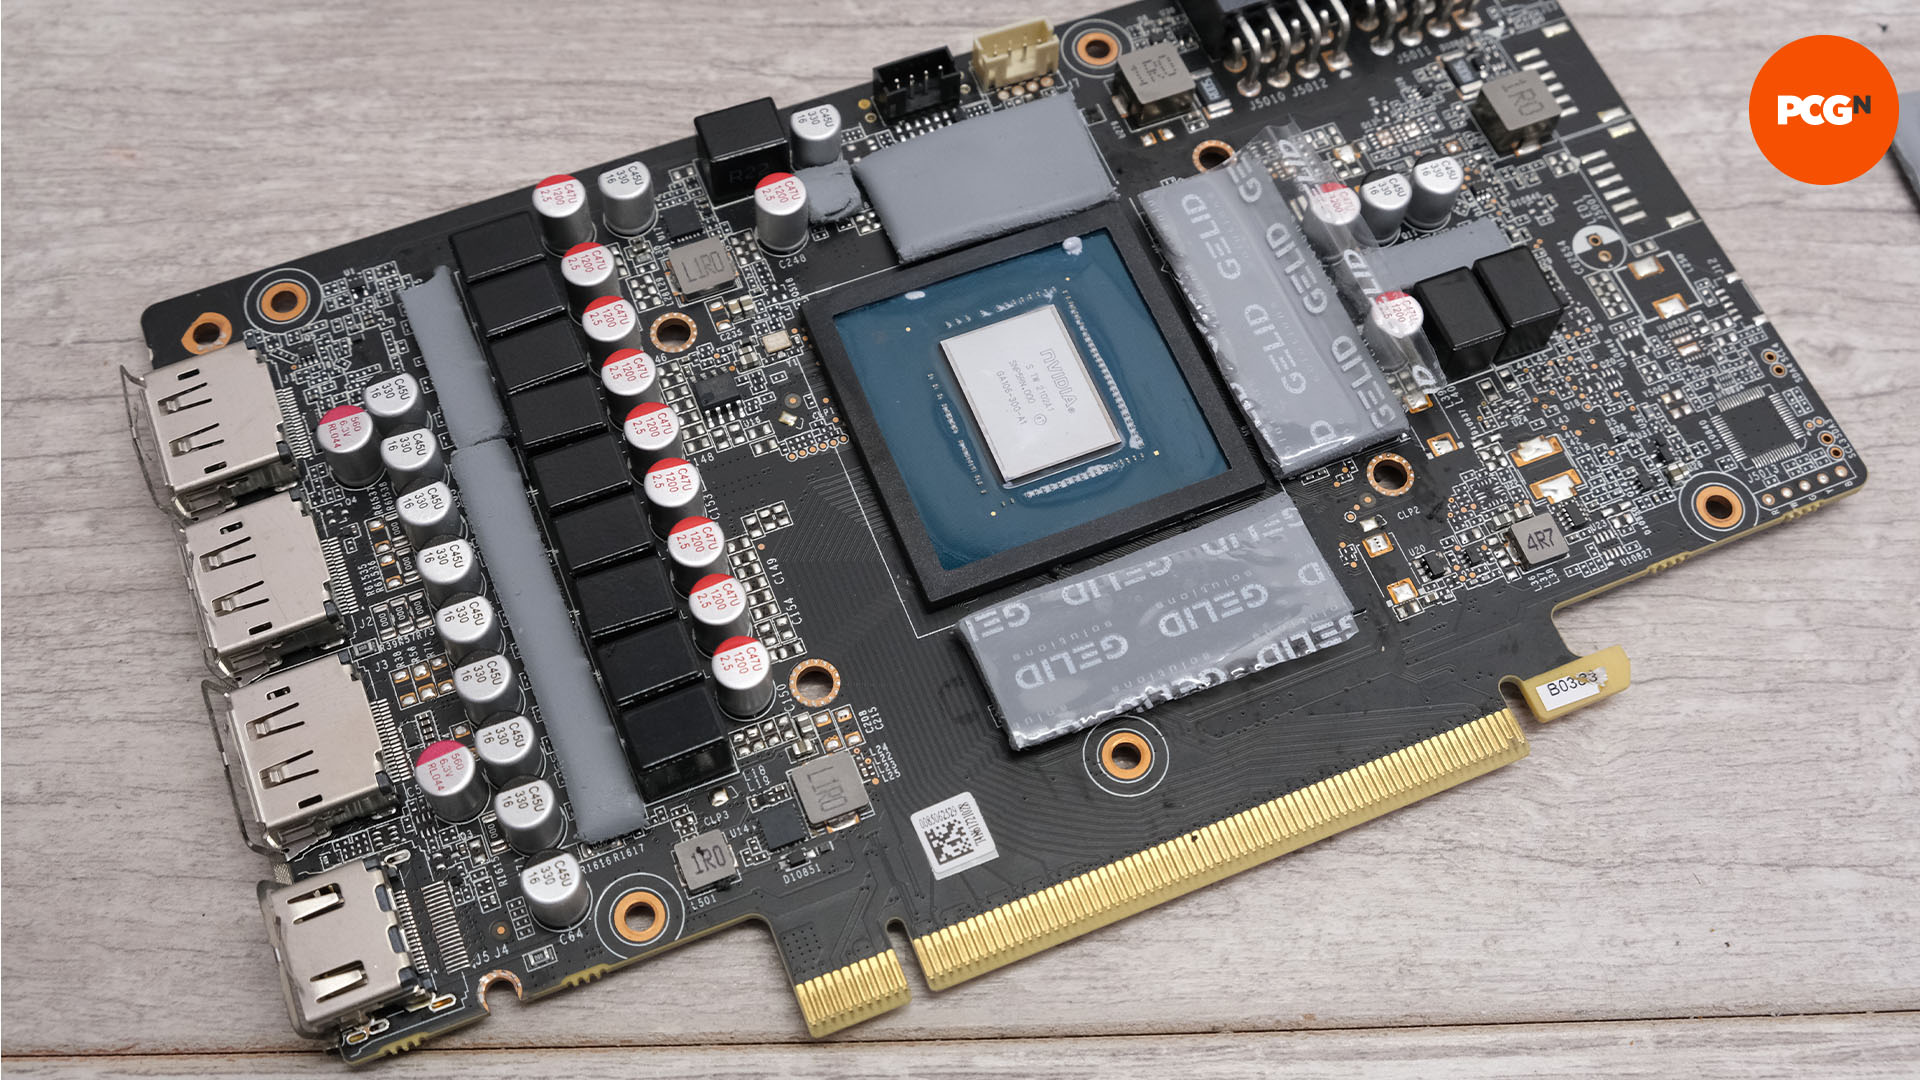 How to lower GPU temp: Fit new thermal pads to graphics card memory and VRMs